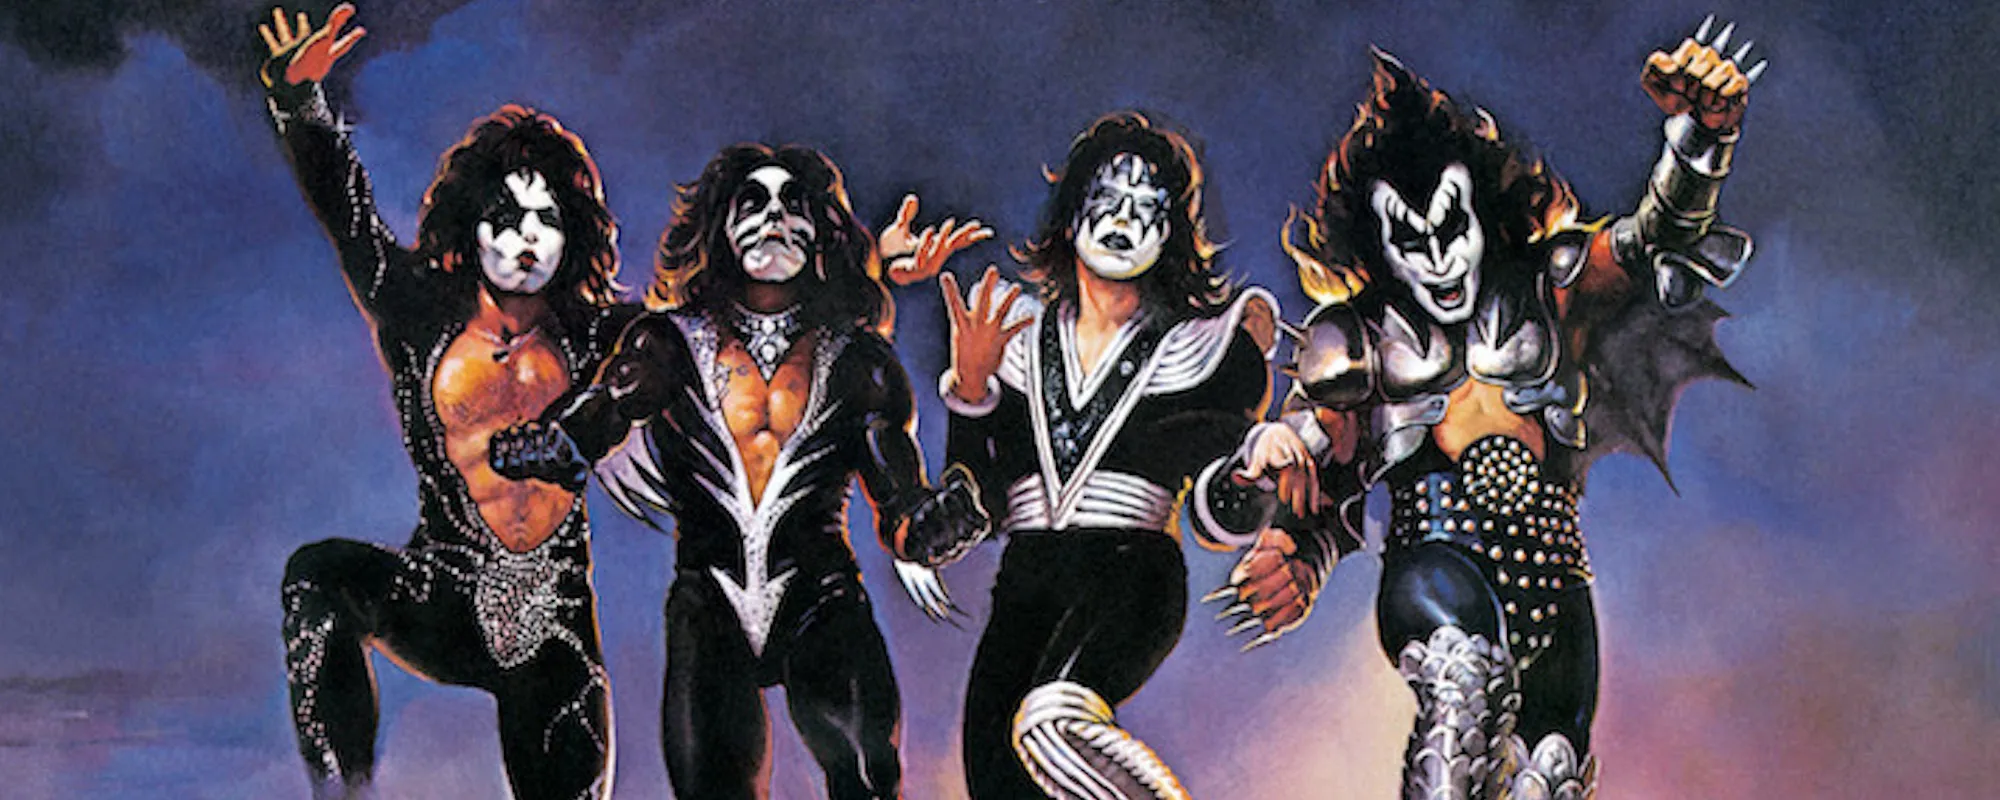 Kiss Celebrate 45th Anniversary of ‘Destroyer’